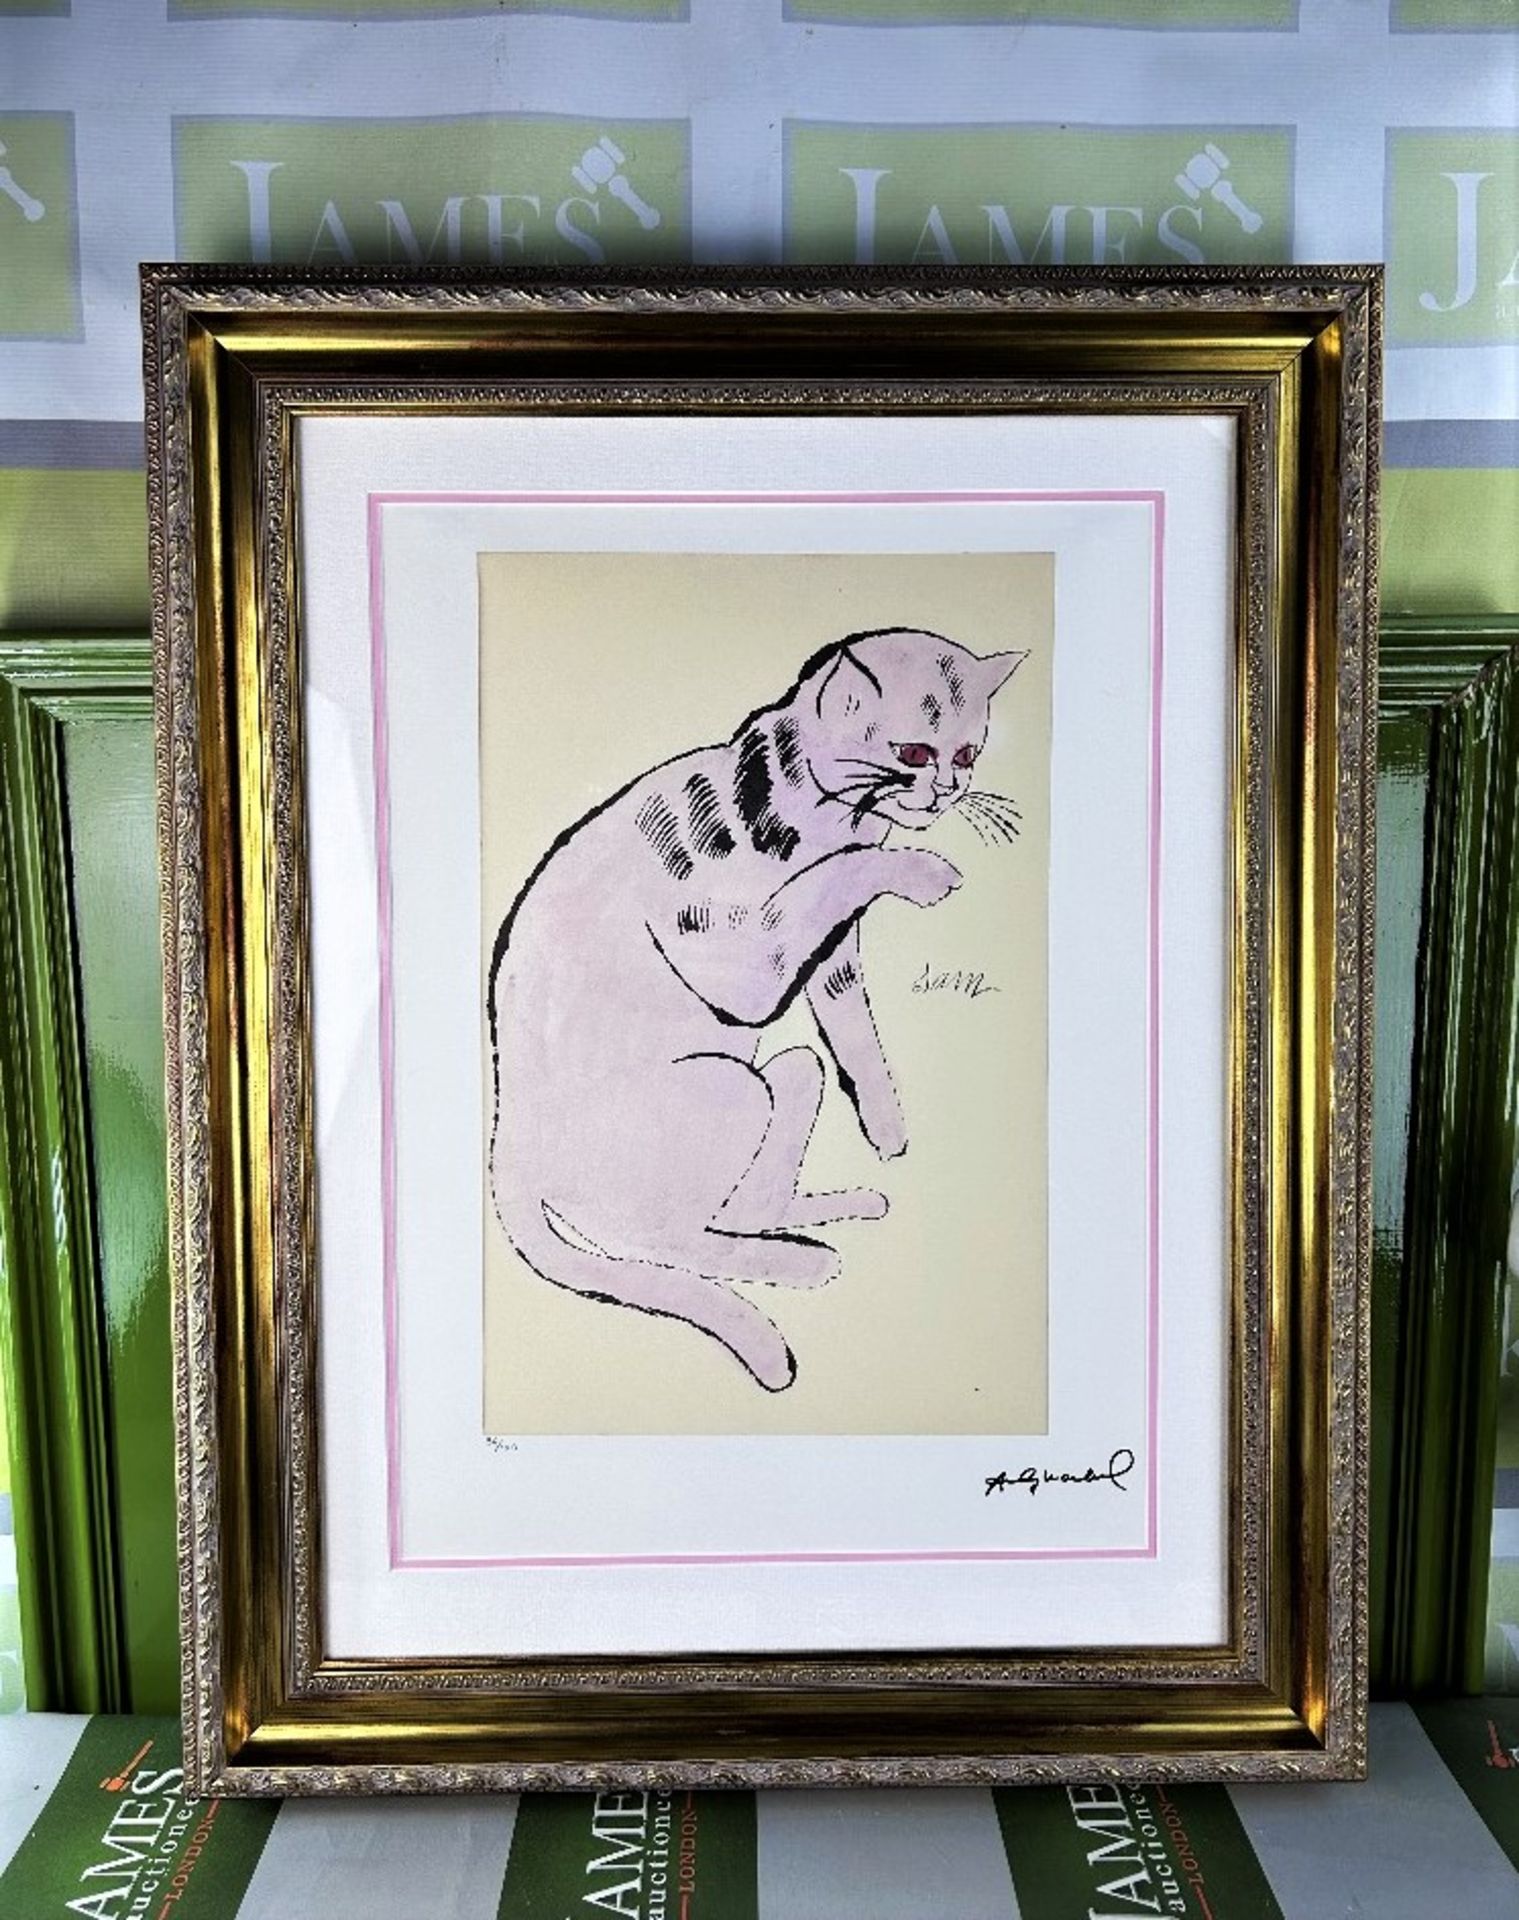 Andy Warhol-(1928-1987) "Pink Sam" Numbered Lithograph